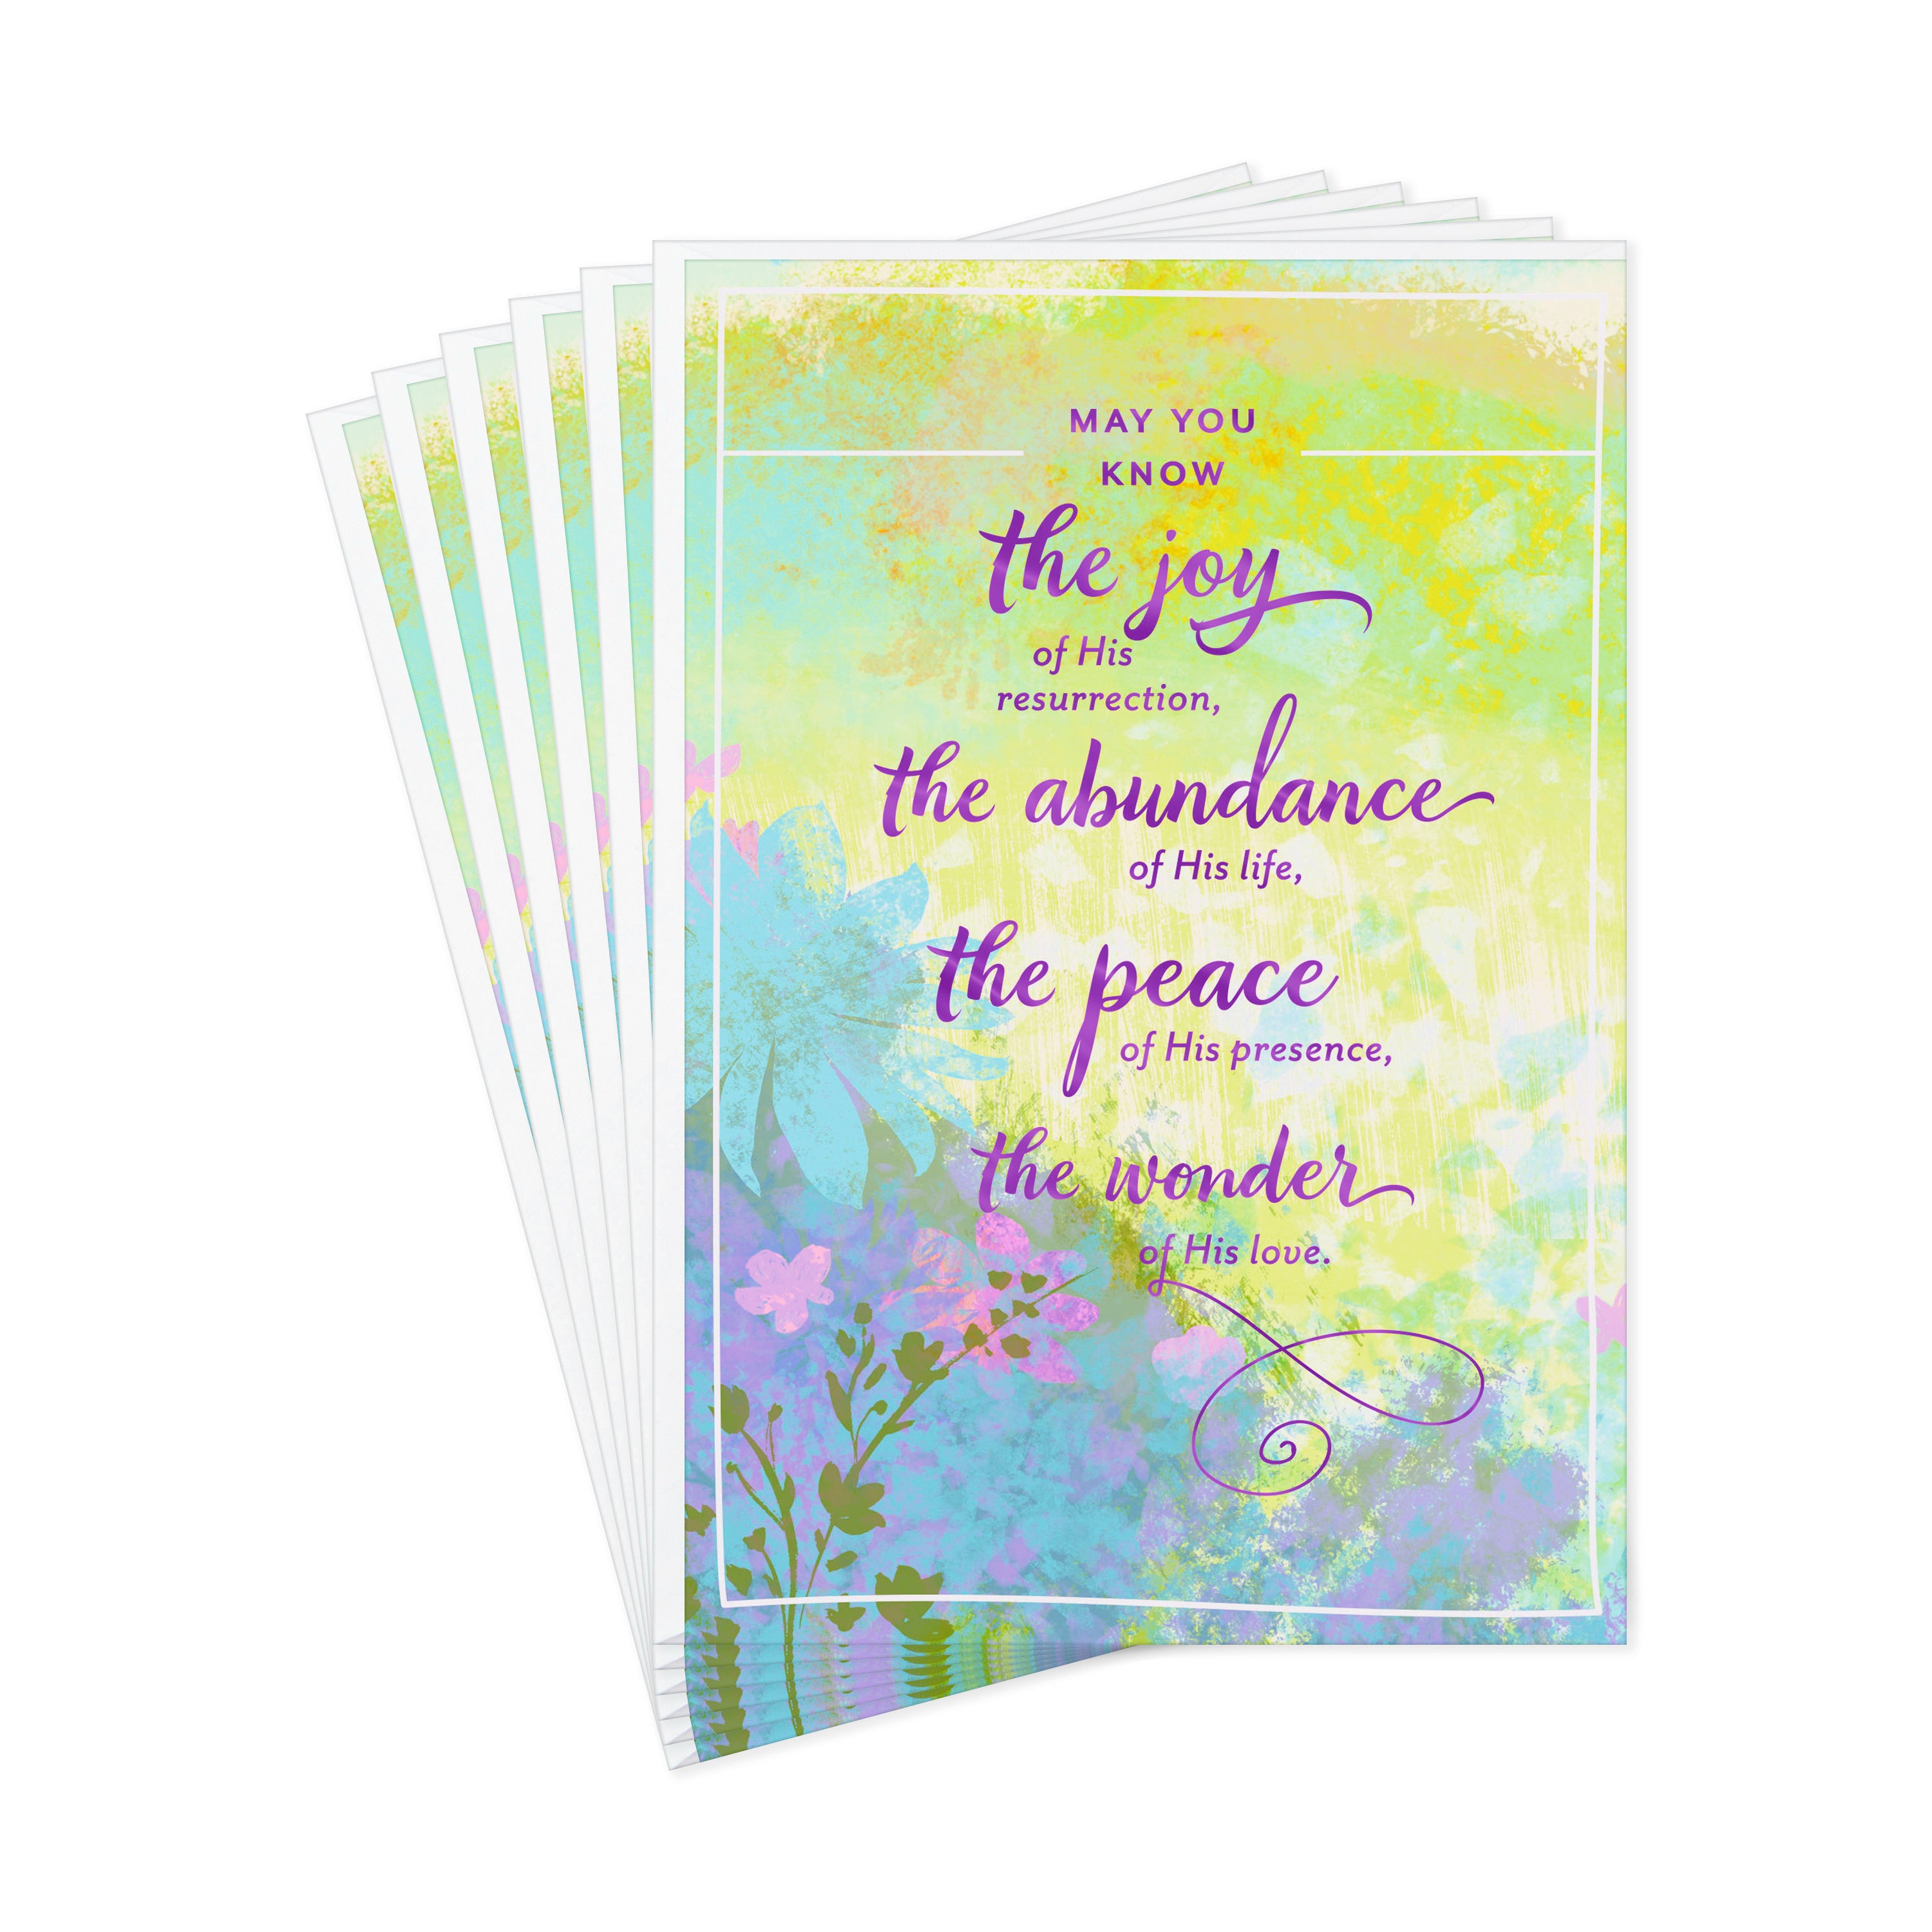 Hallmark Dayspring Pack of Religious Easter Cards, Wonder of His Love (6 Cards with Envelopes)